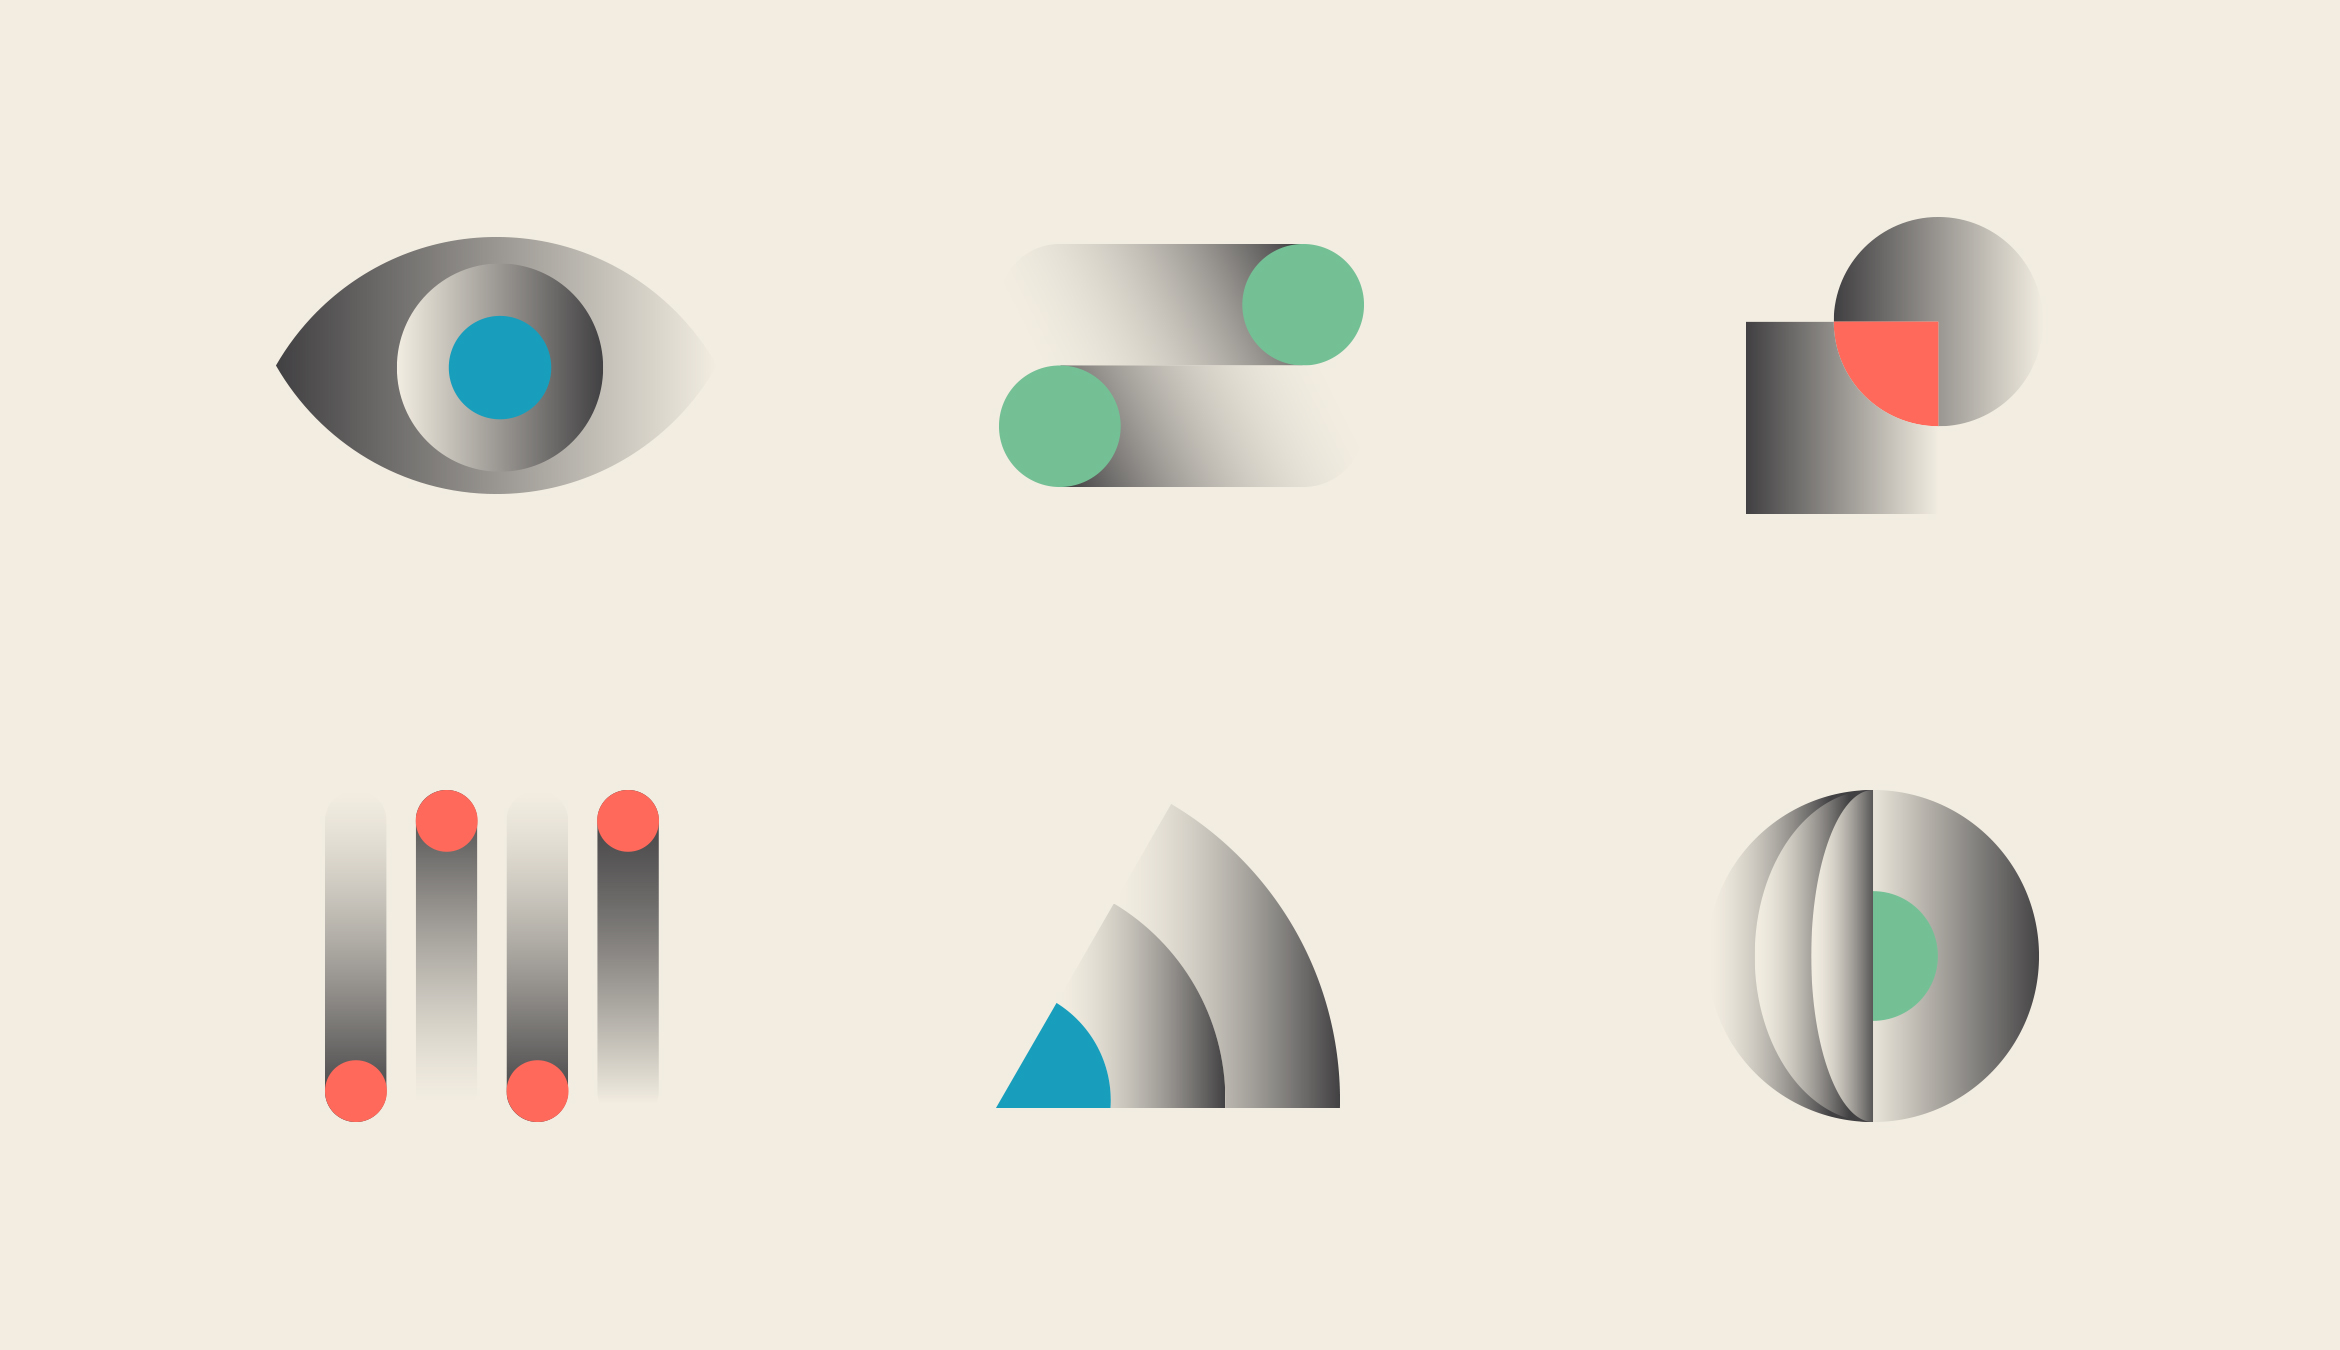 digital design of 6 custom abstract icons using green, aqua and coral circles on black and cream gradient geometric shapes